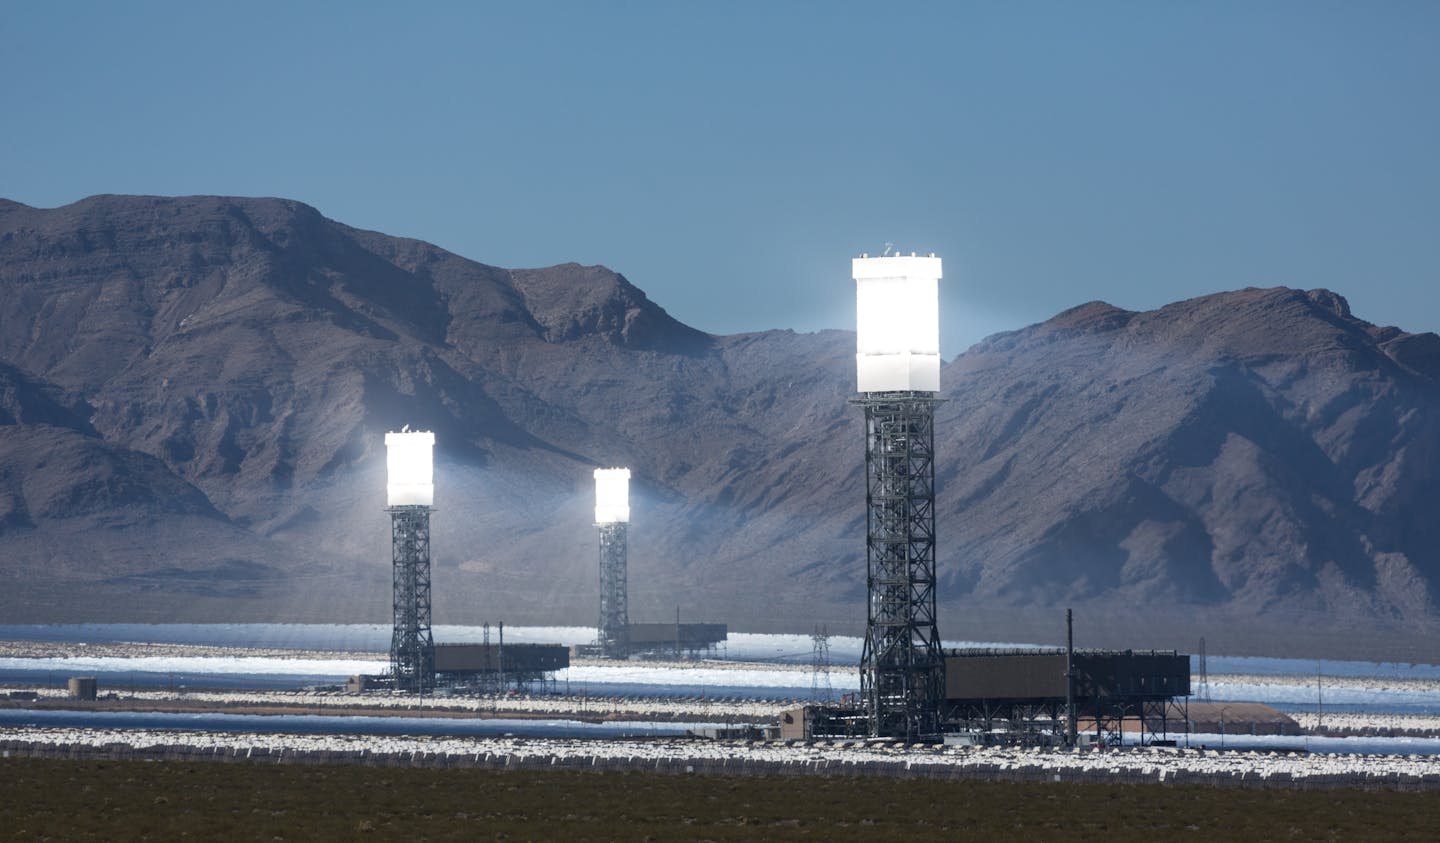 Three glowing solar towers in the desert.